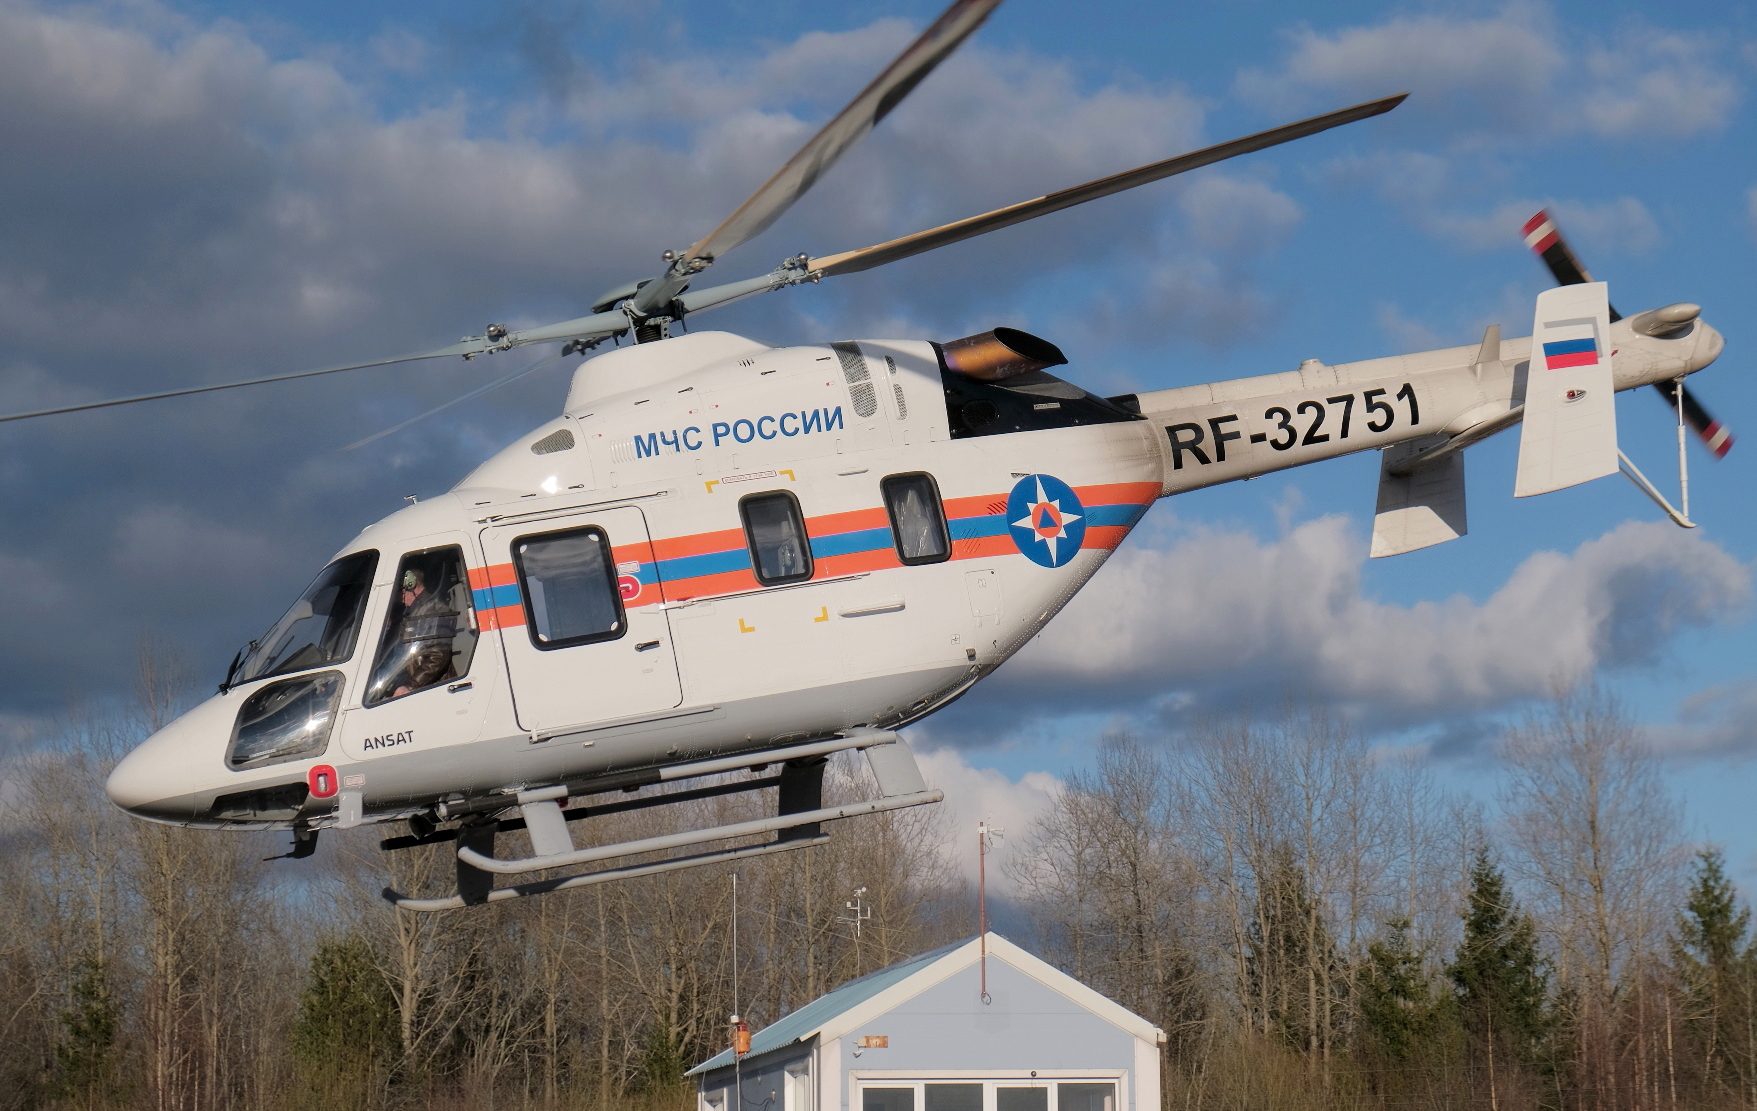 The Ansat helicopter delivered to Emercom of Russia will be used for pilot training, transporting staff, cargo and equipment, and to tackle special tasks.. Picture by Steven Howard of TravelNewsAsia.com Click to enlarge.